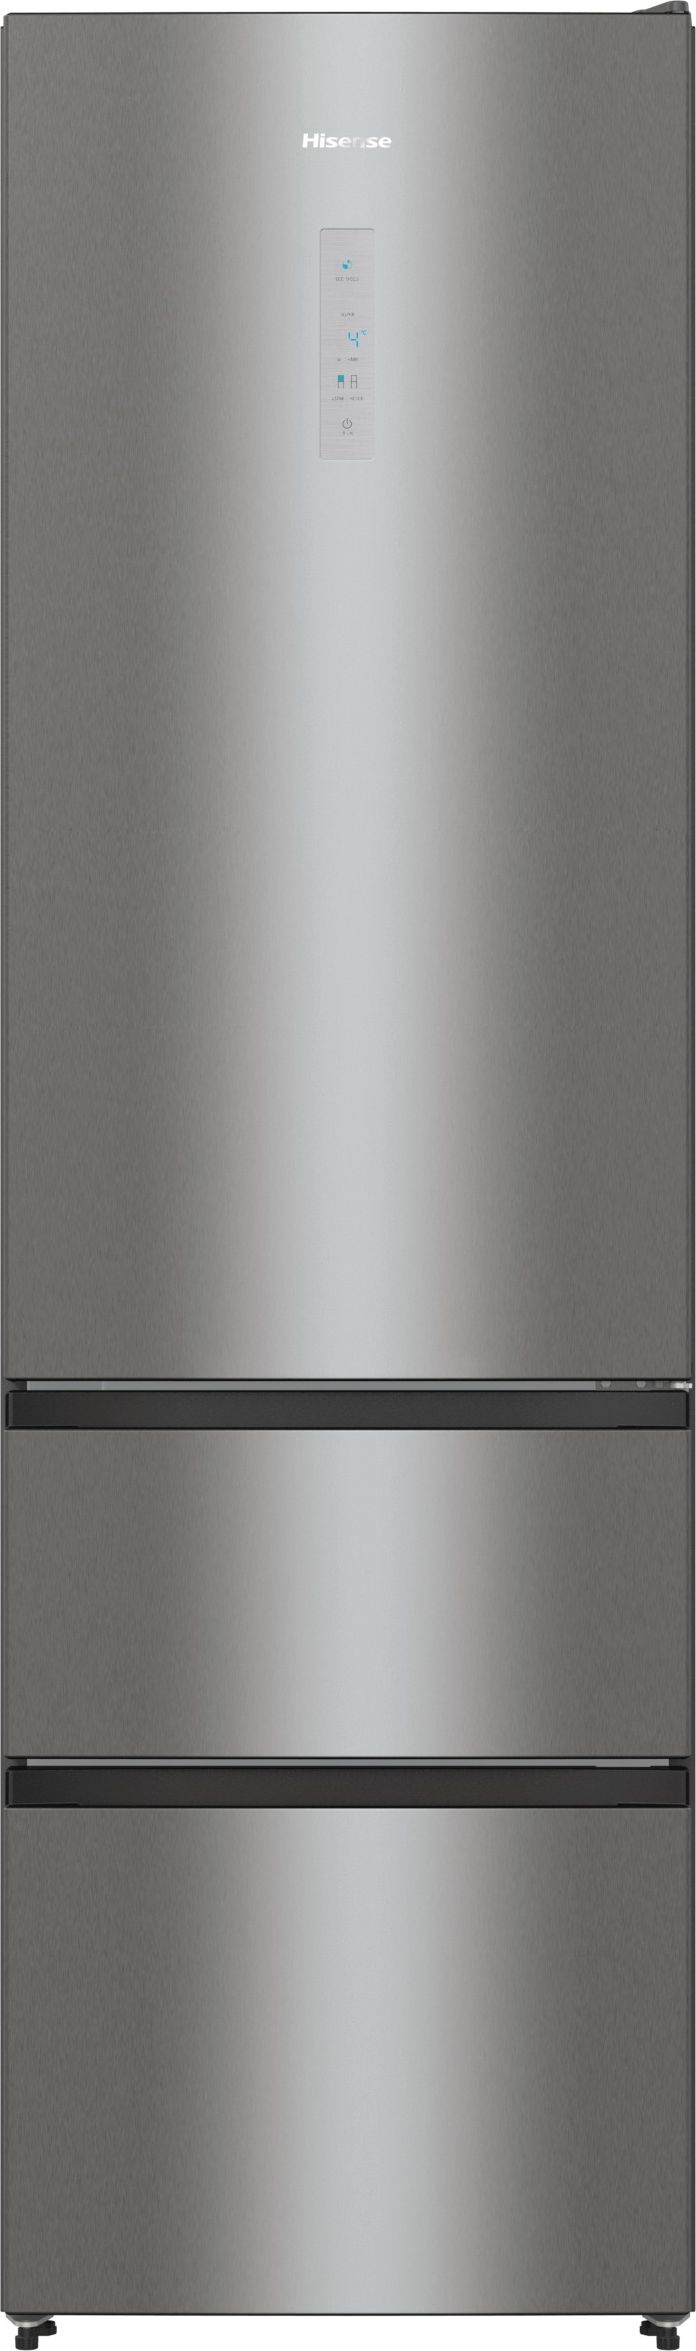 Hisense RM469N4ACEUK 70/30 No Frost Fridge Freezer - Stainless Steel - E Rated, Stainless Steel